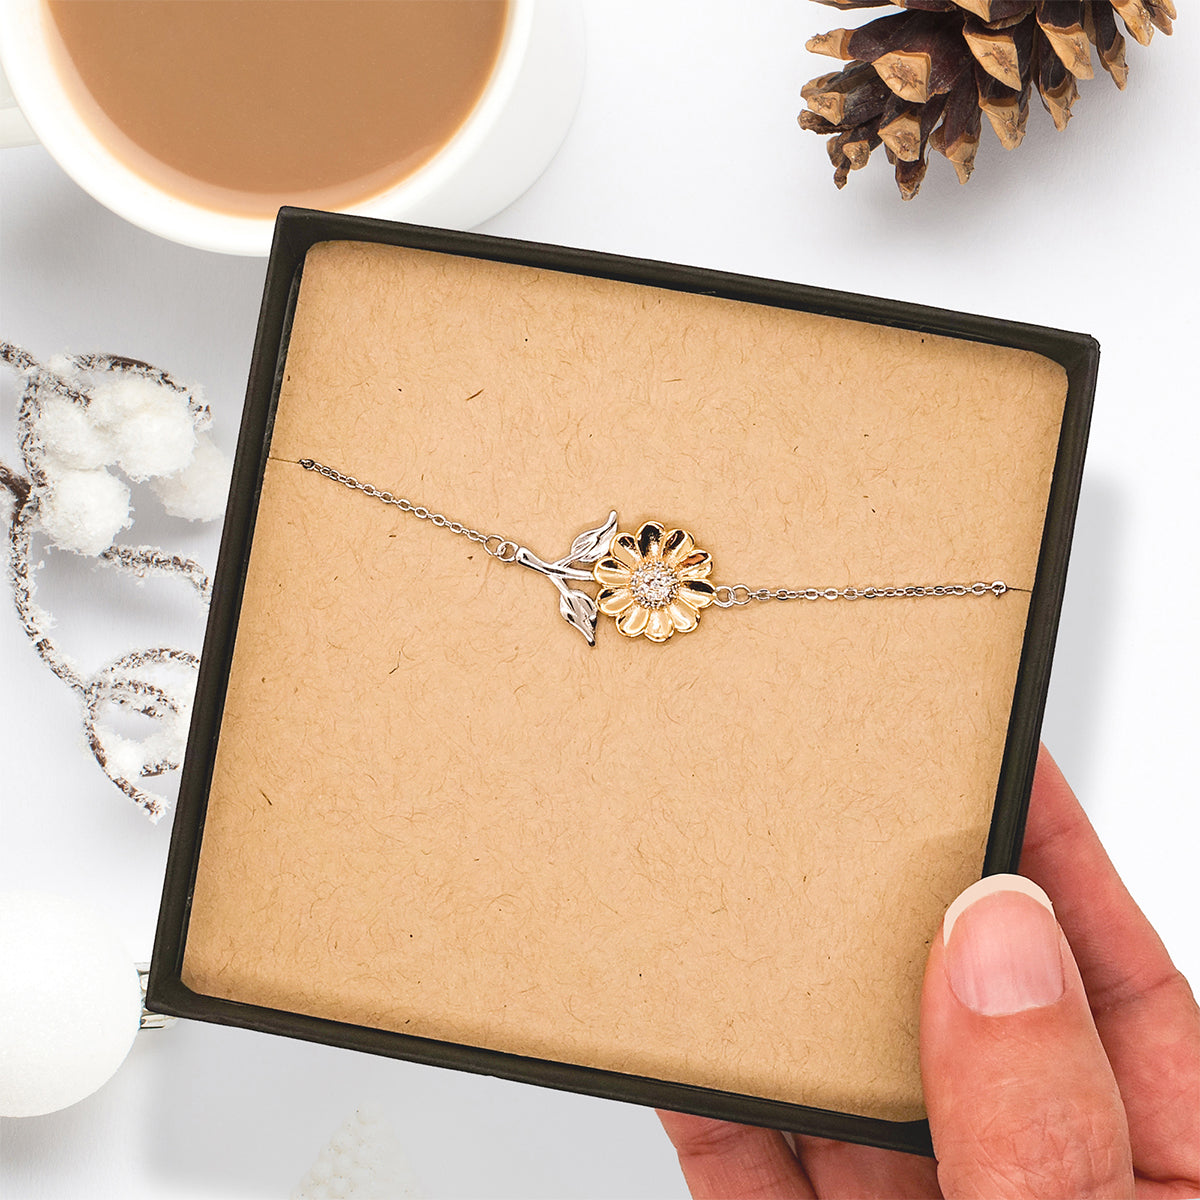 Mom Sunflower Bracelet - You will always have a special place in my heart - Meaningful and Unique Gift for Mothers Day, Birthday, Christmas, and Any Special Occasions - Perfect Jewelry for Mom